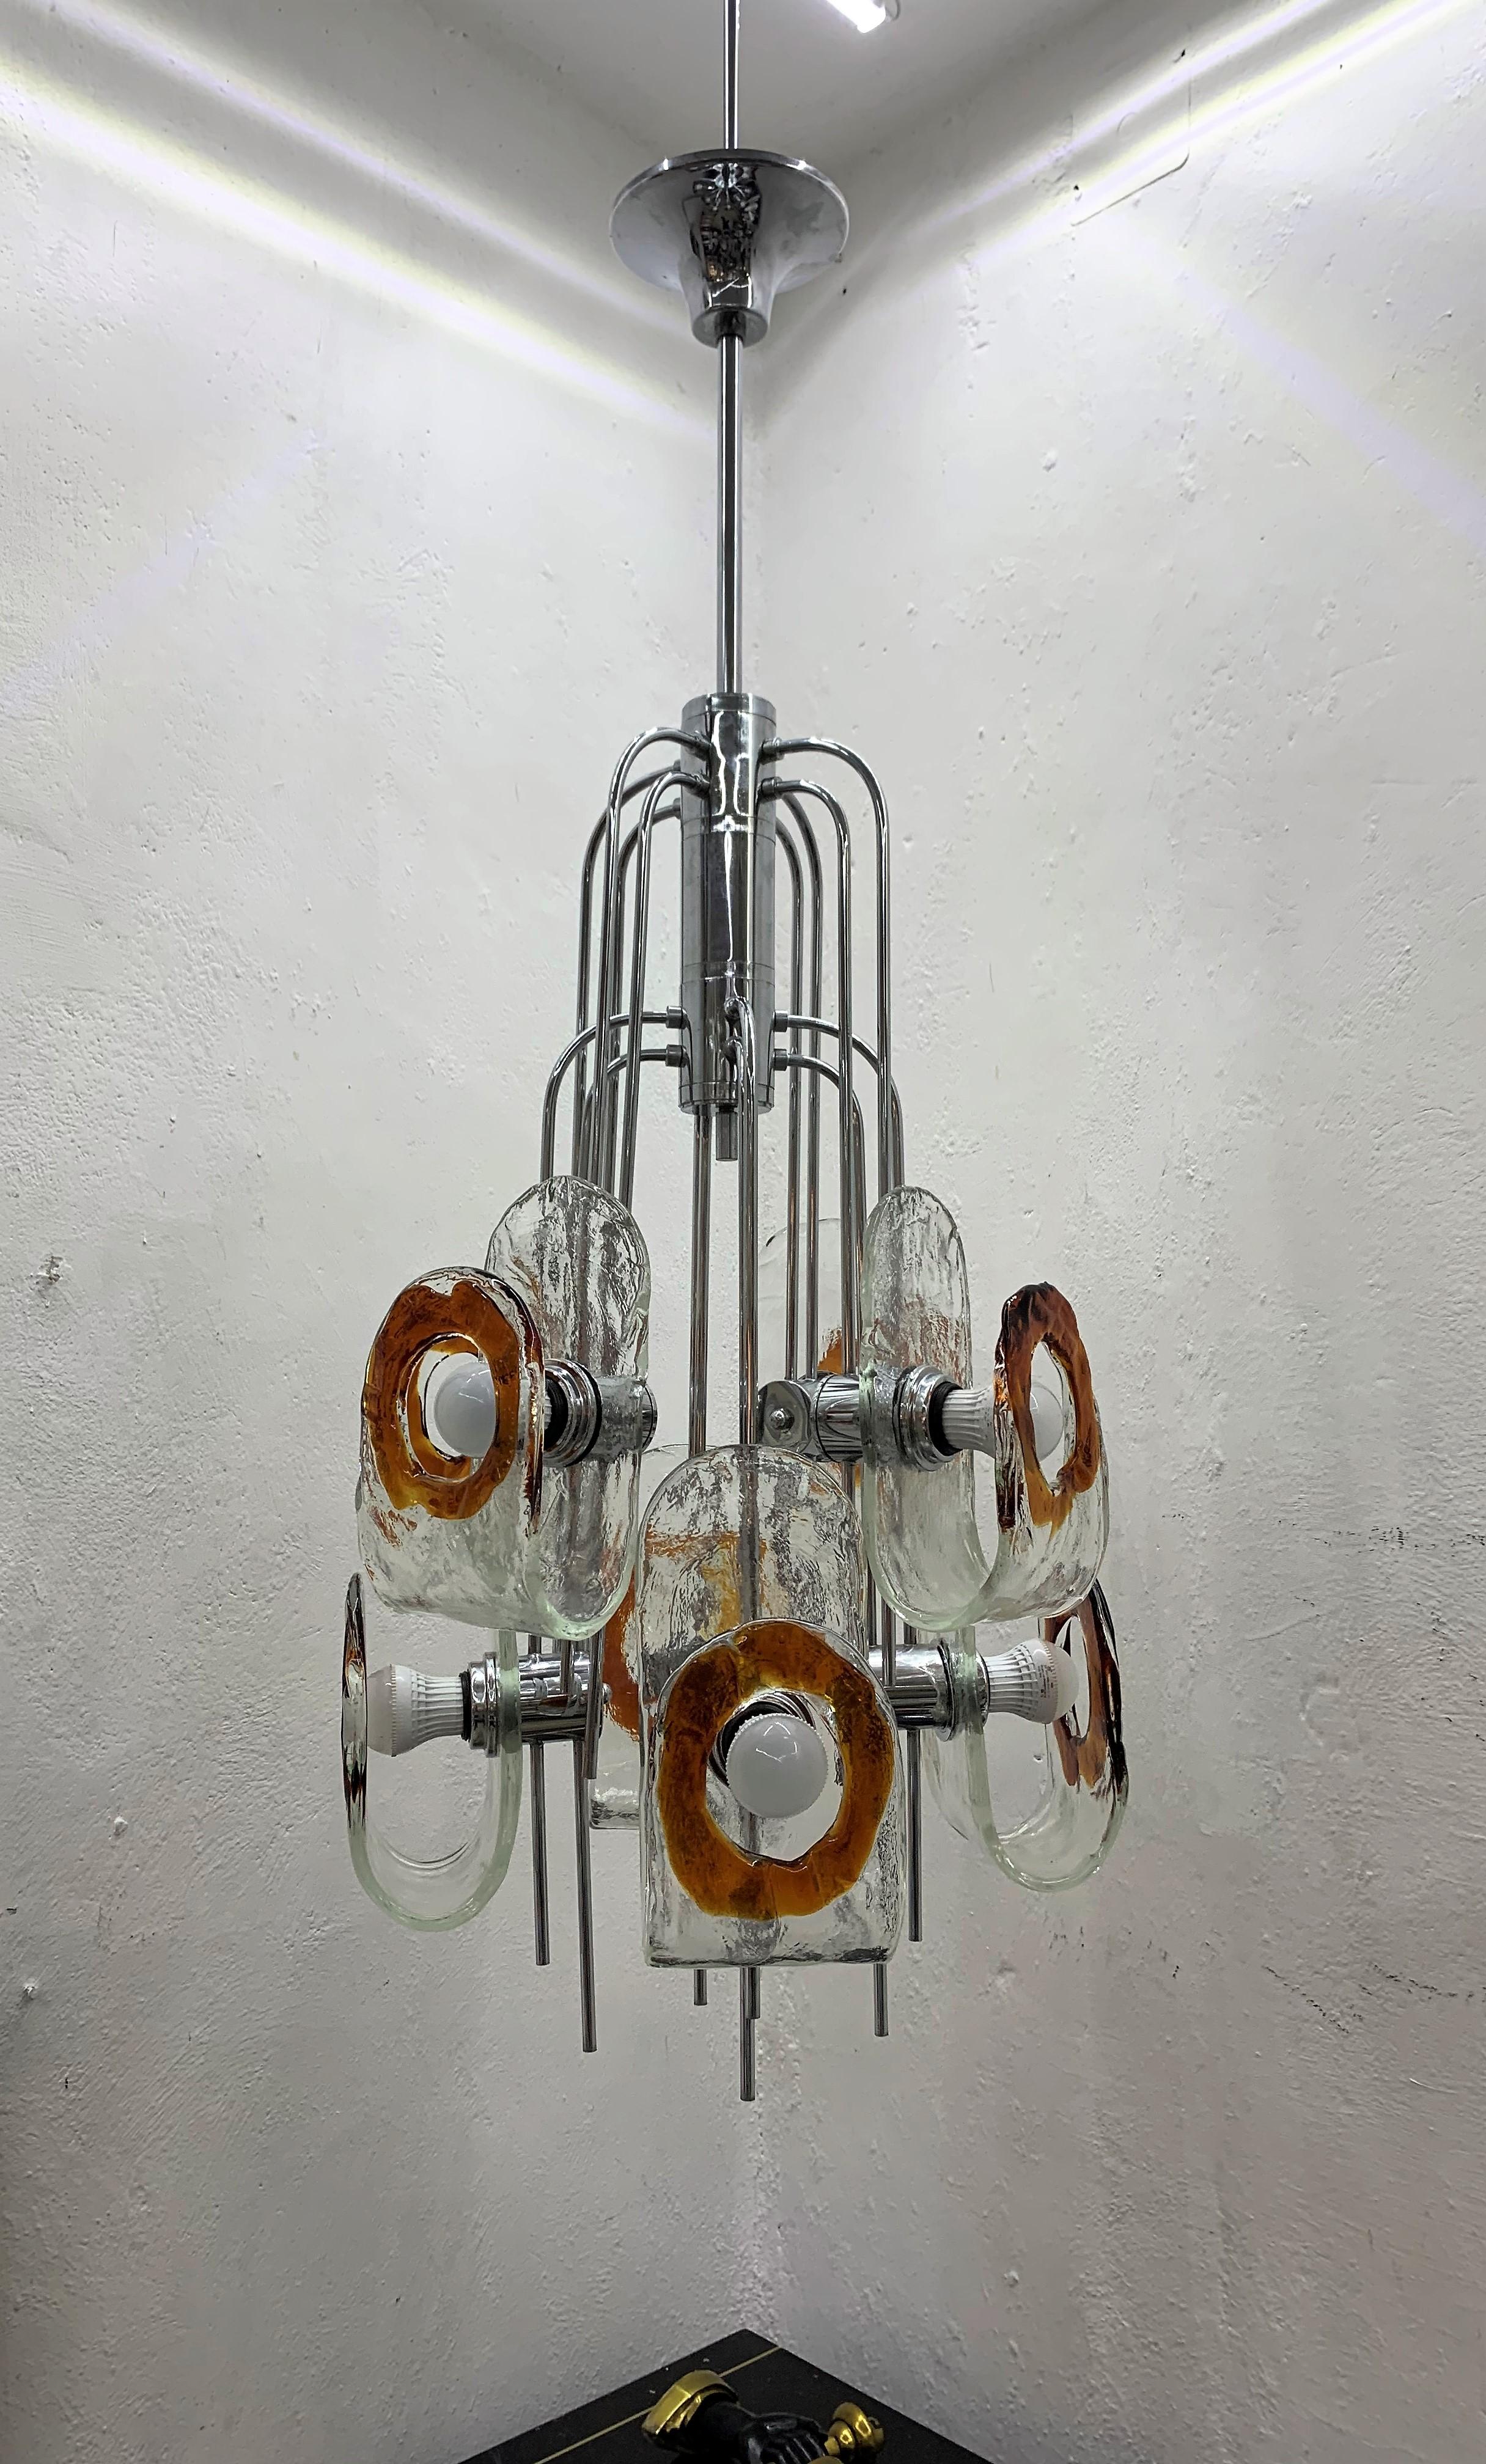 Blown Glass Large Mid-Century Modern Chandelier by Mazzega, Murano Glass, Italy circa 1970 For Sale